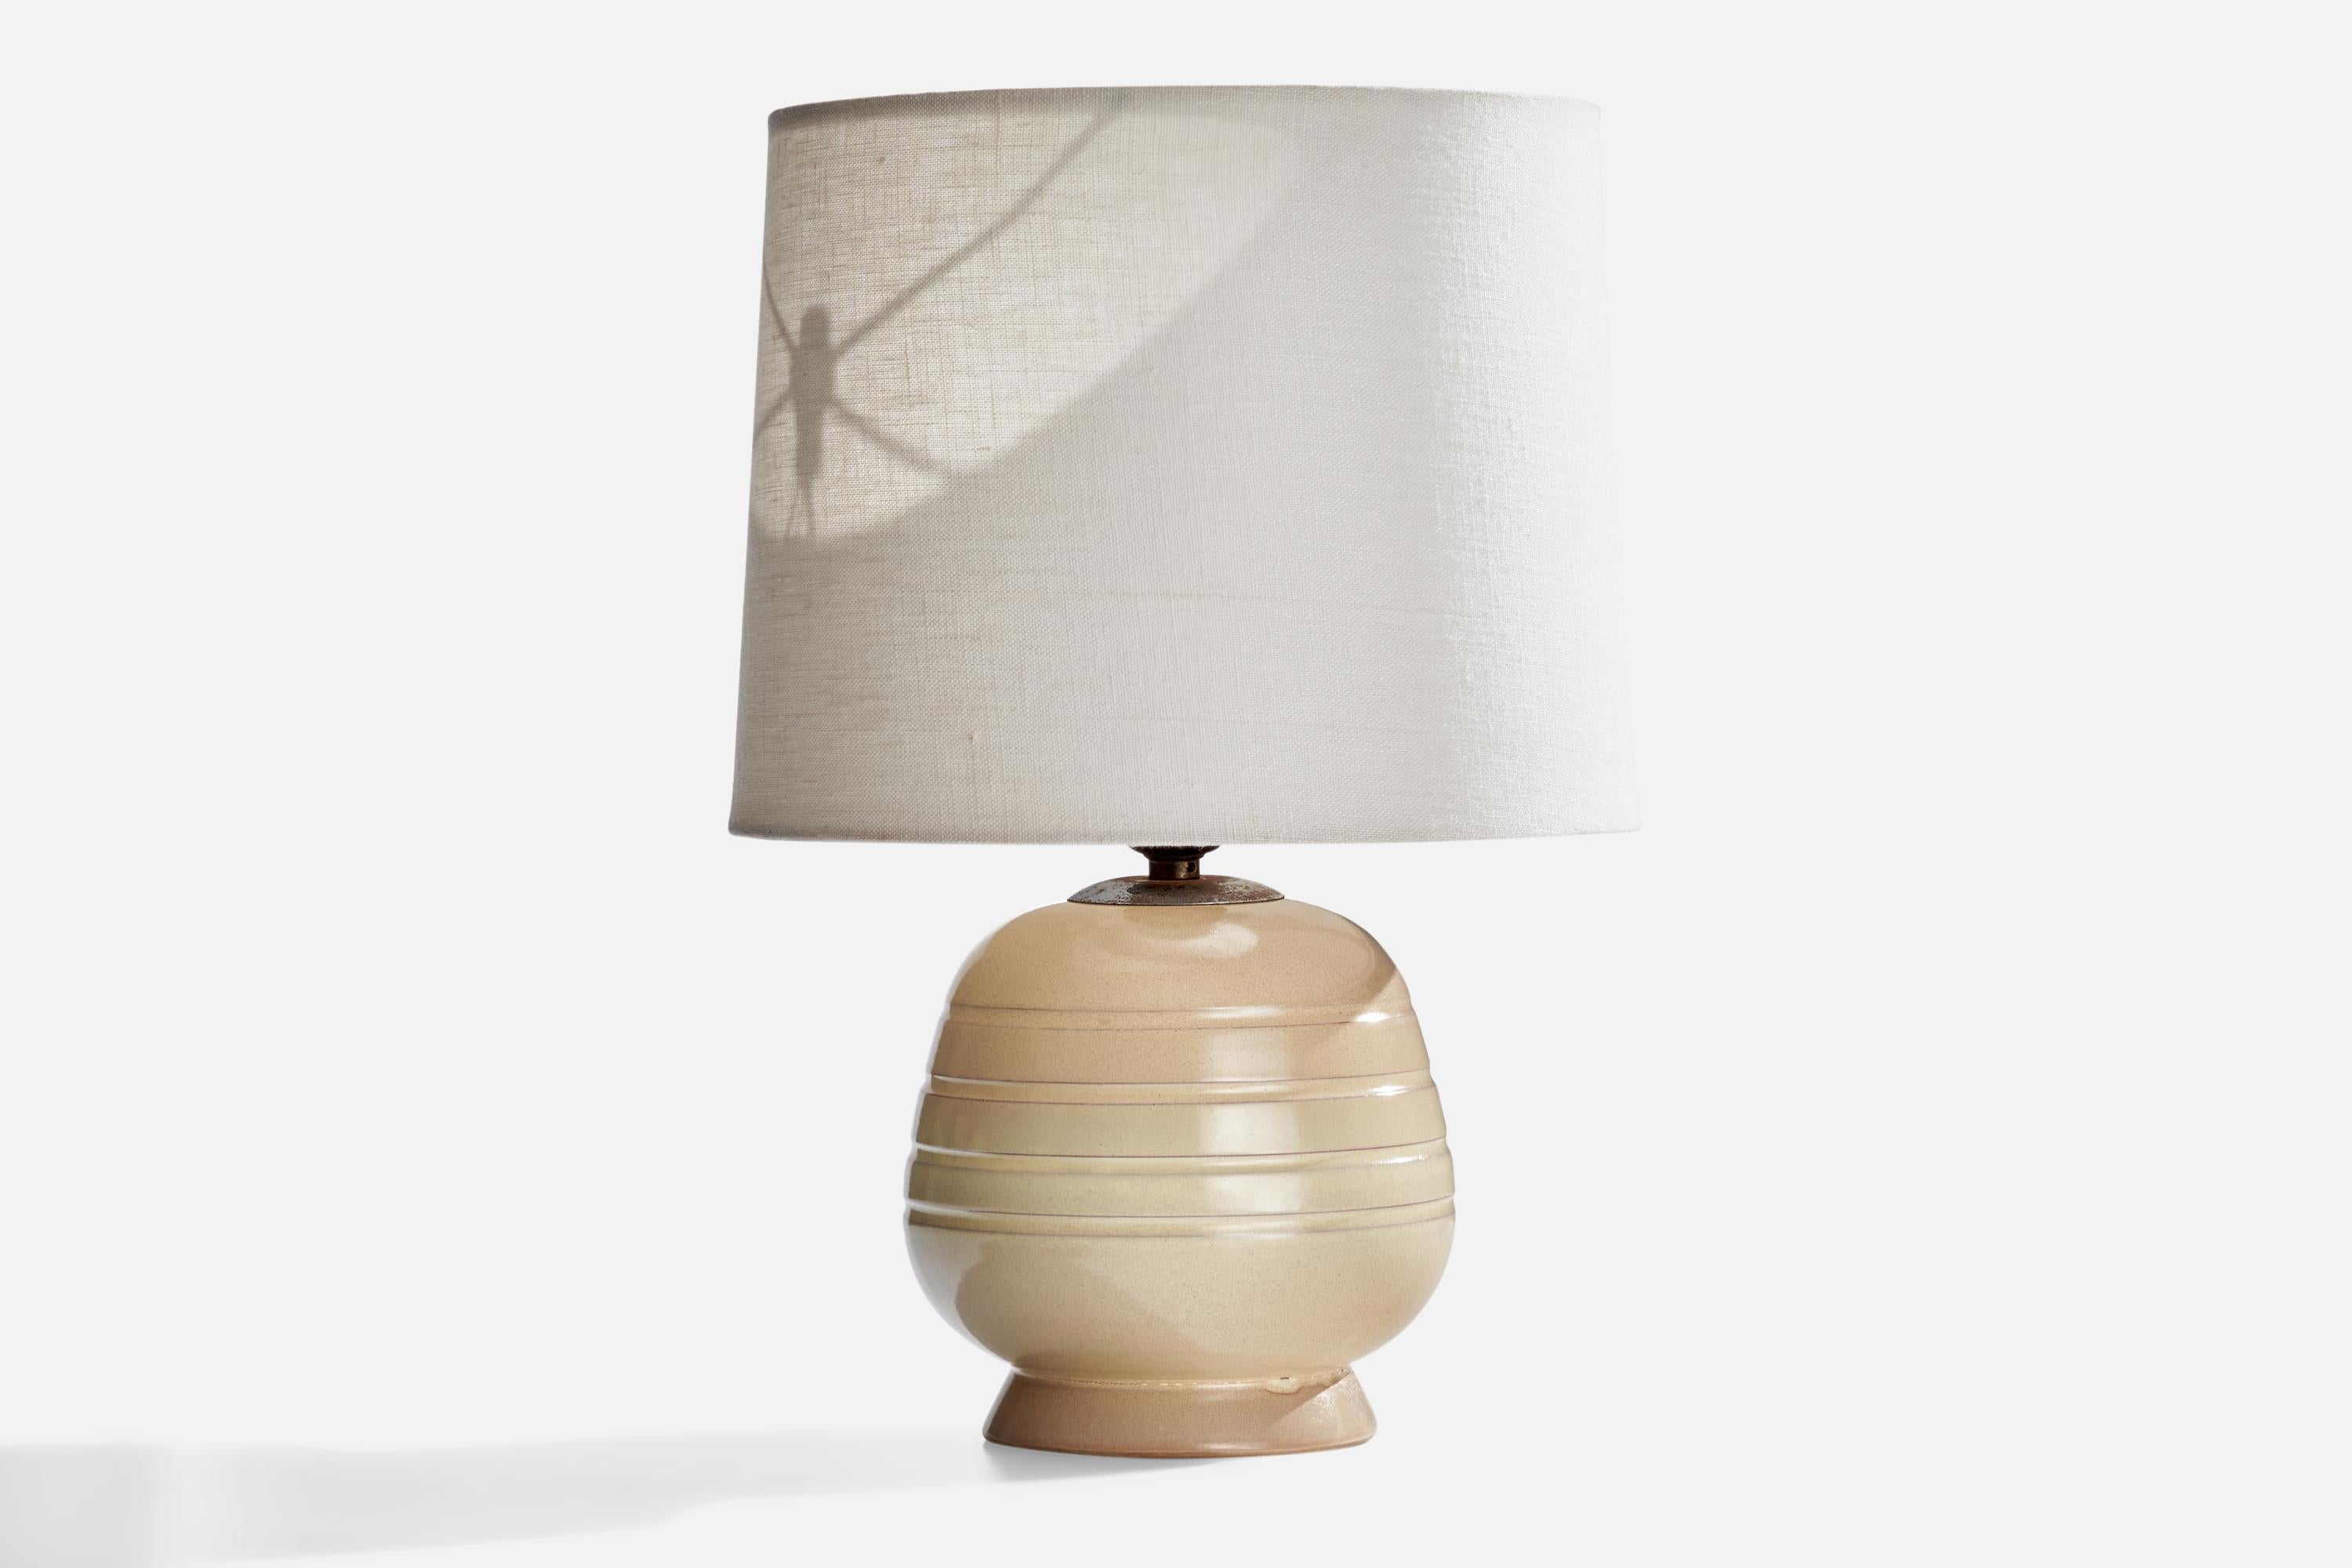 A cream beige table lamp designed and produced in Sweden, c. 1930s.

Dimensions of Lamp (inches): 9.25” H x 6” Diameter
Dimensions of Shade (inches): 5” Top Diameter x 8” Bottom Diameter x 6” H
Dimensions of Lamp with Shade (inches): 12.5” H x 8”